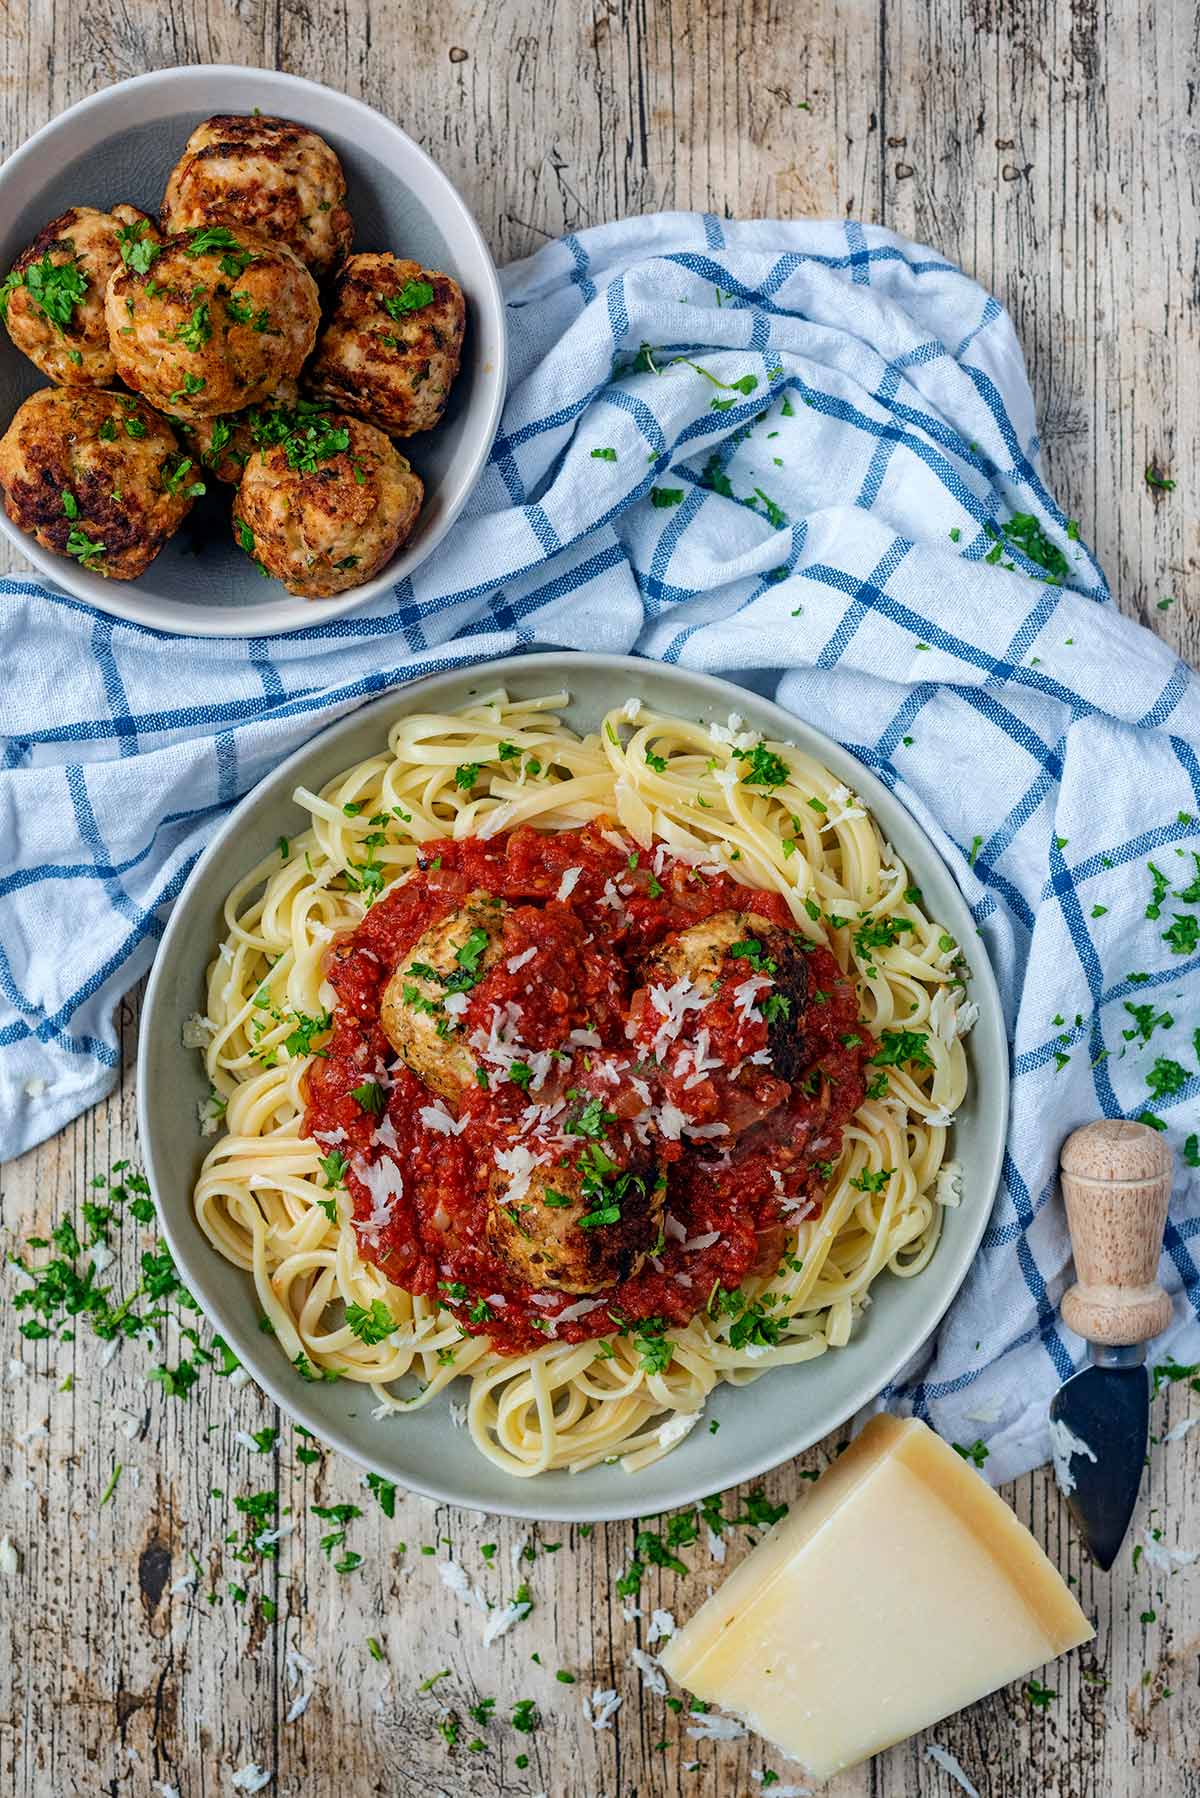 A bowl of spaghetti and meatballs in a tomato sauce next to a blue and white towel.